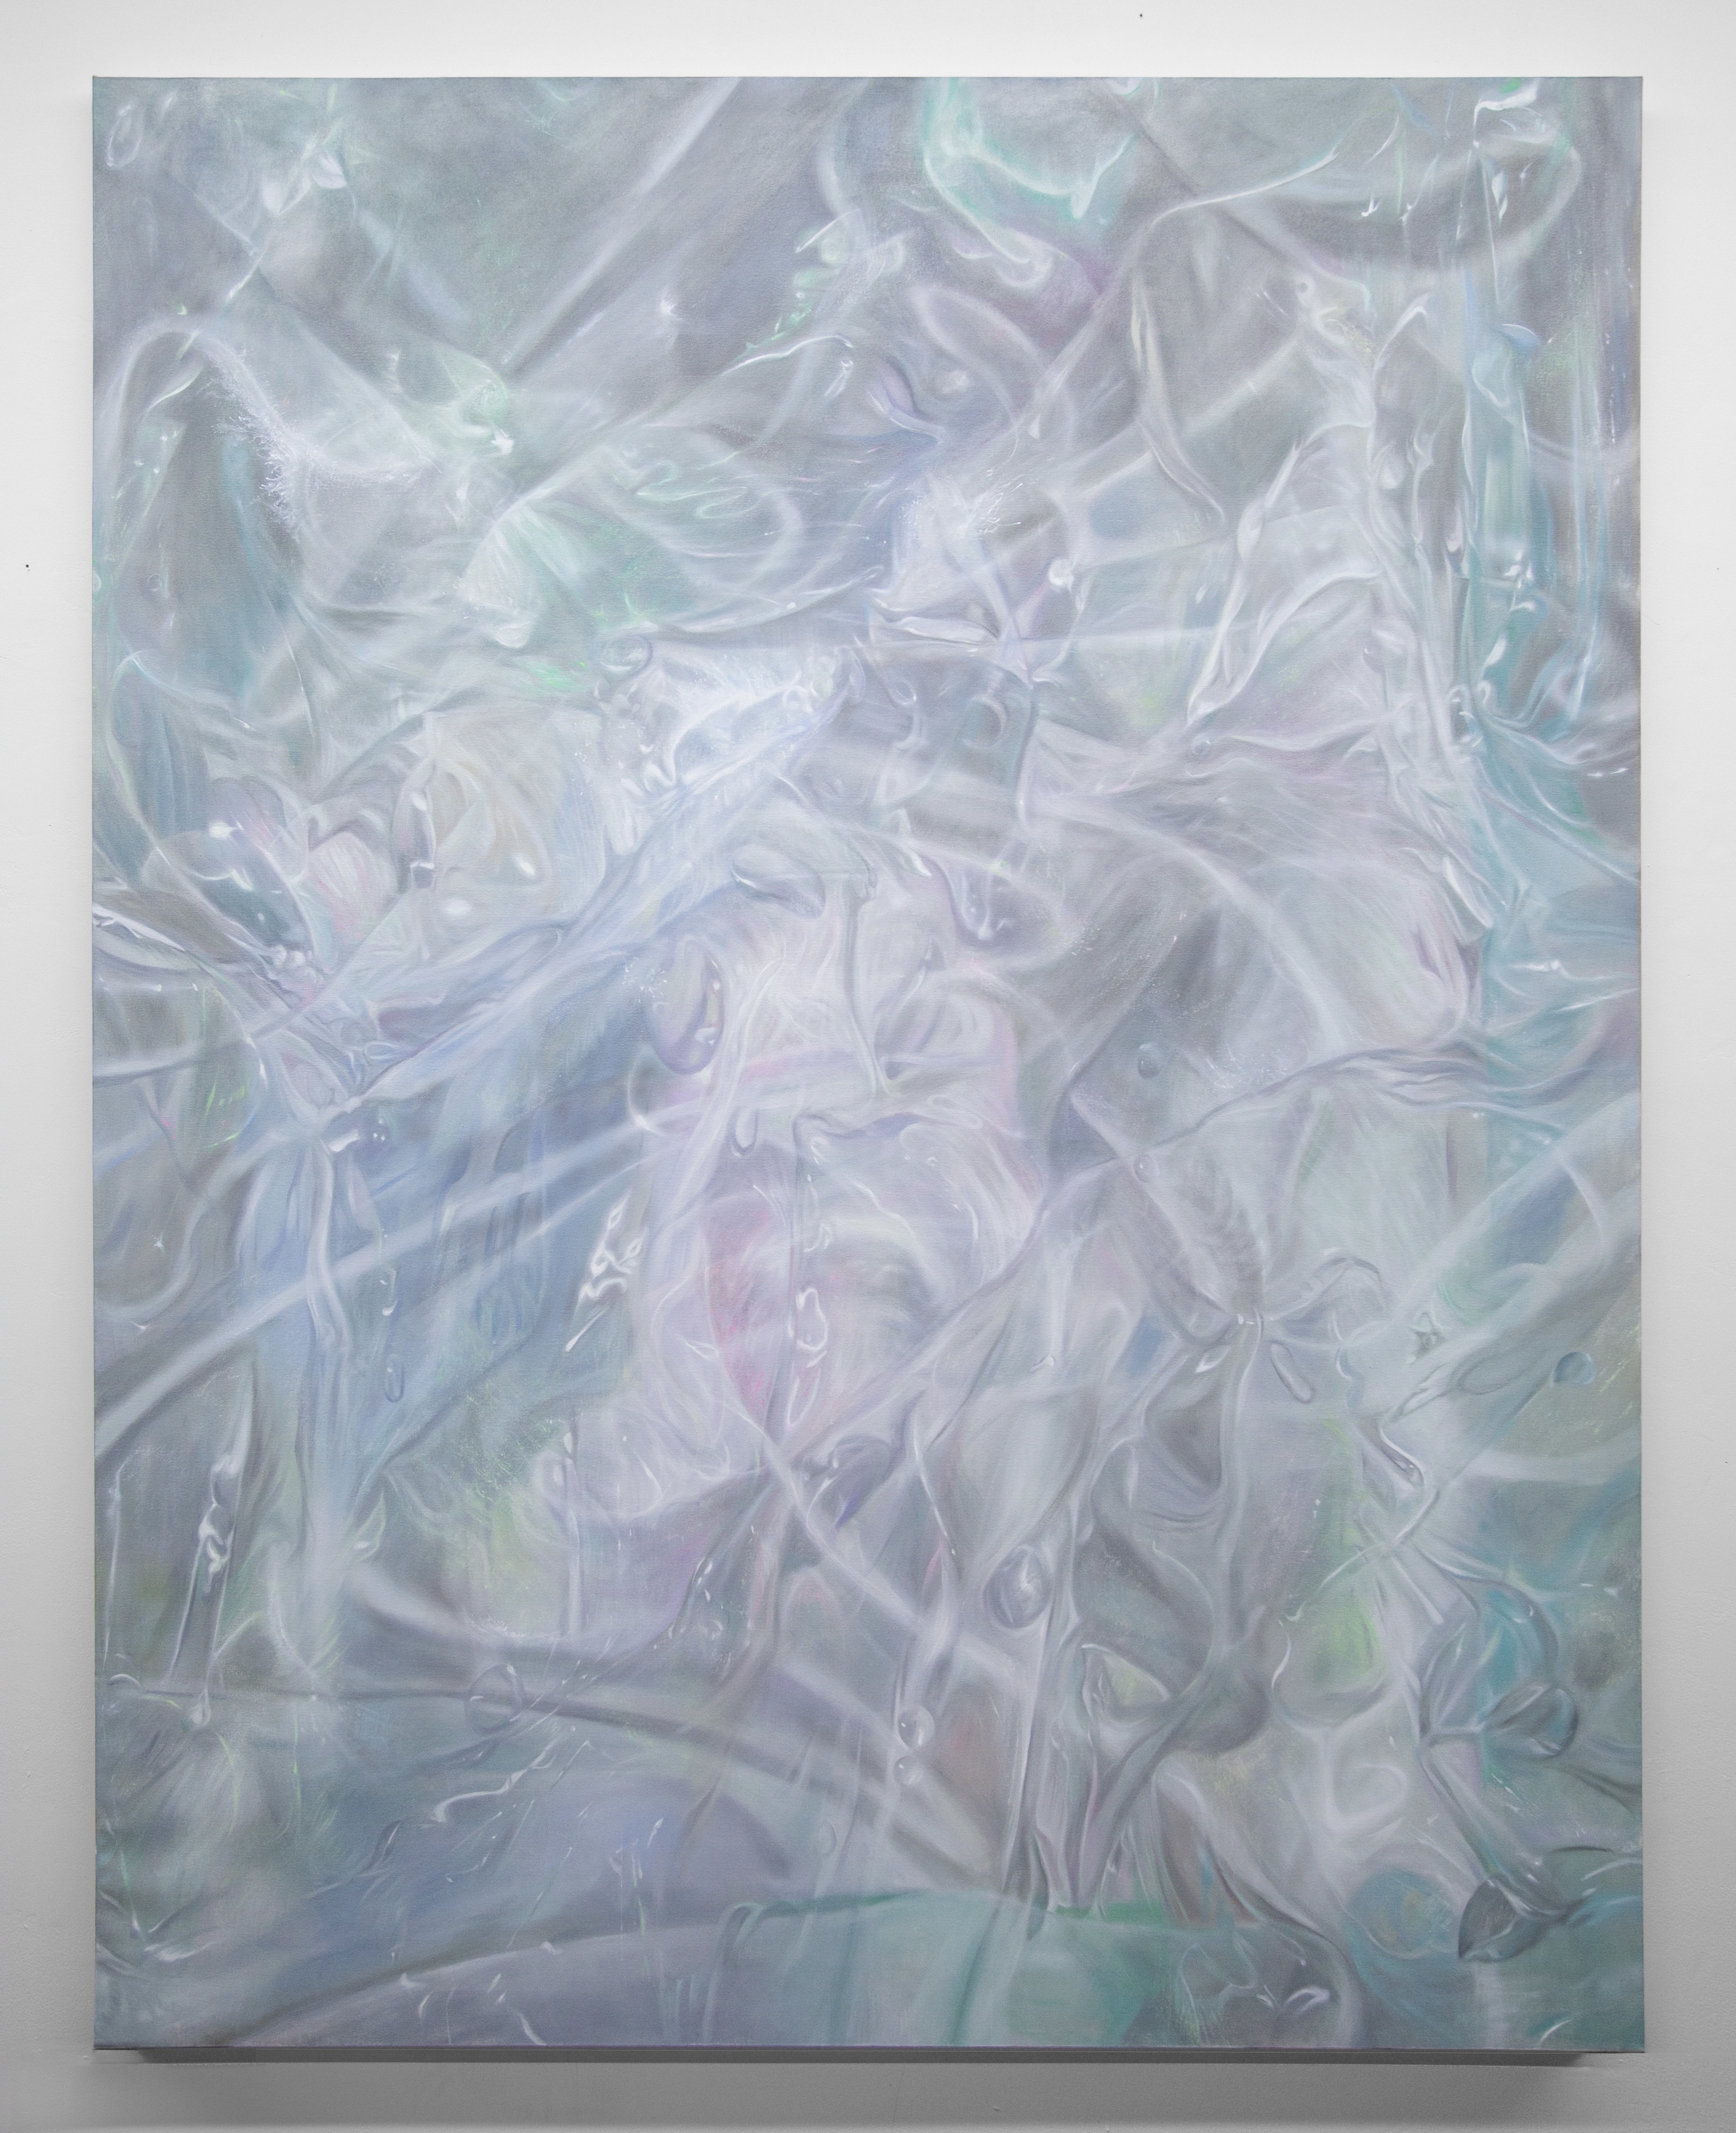 Submerge, 2022, 76x60 inches, oil on canvas